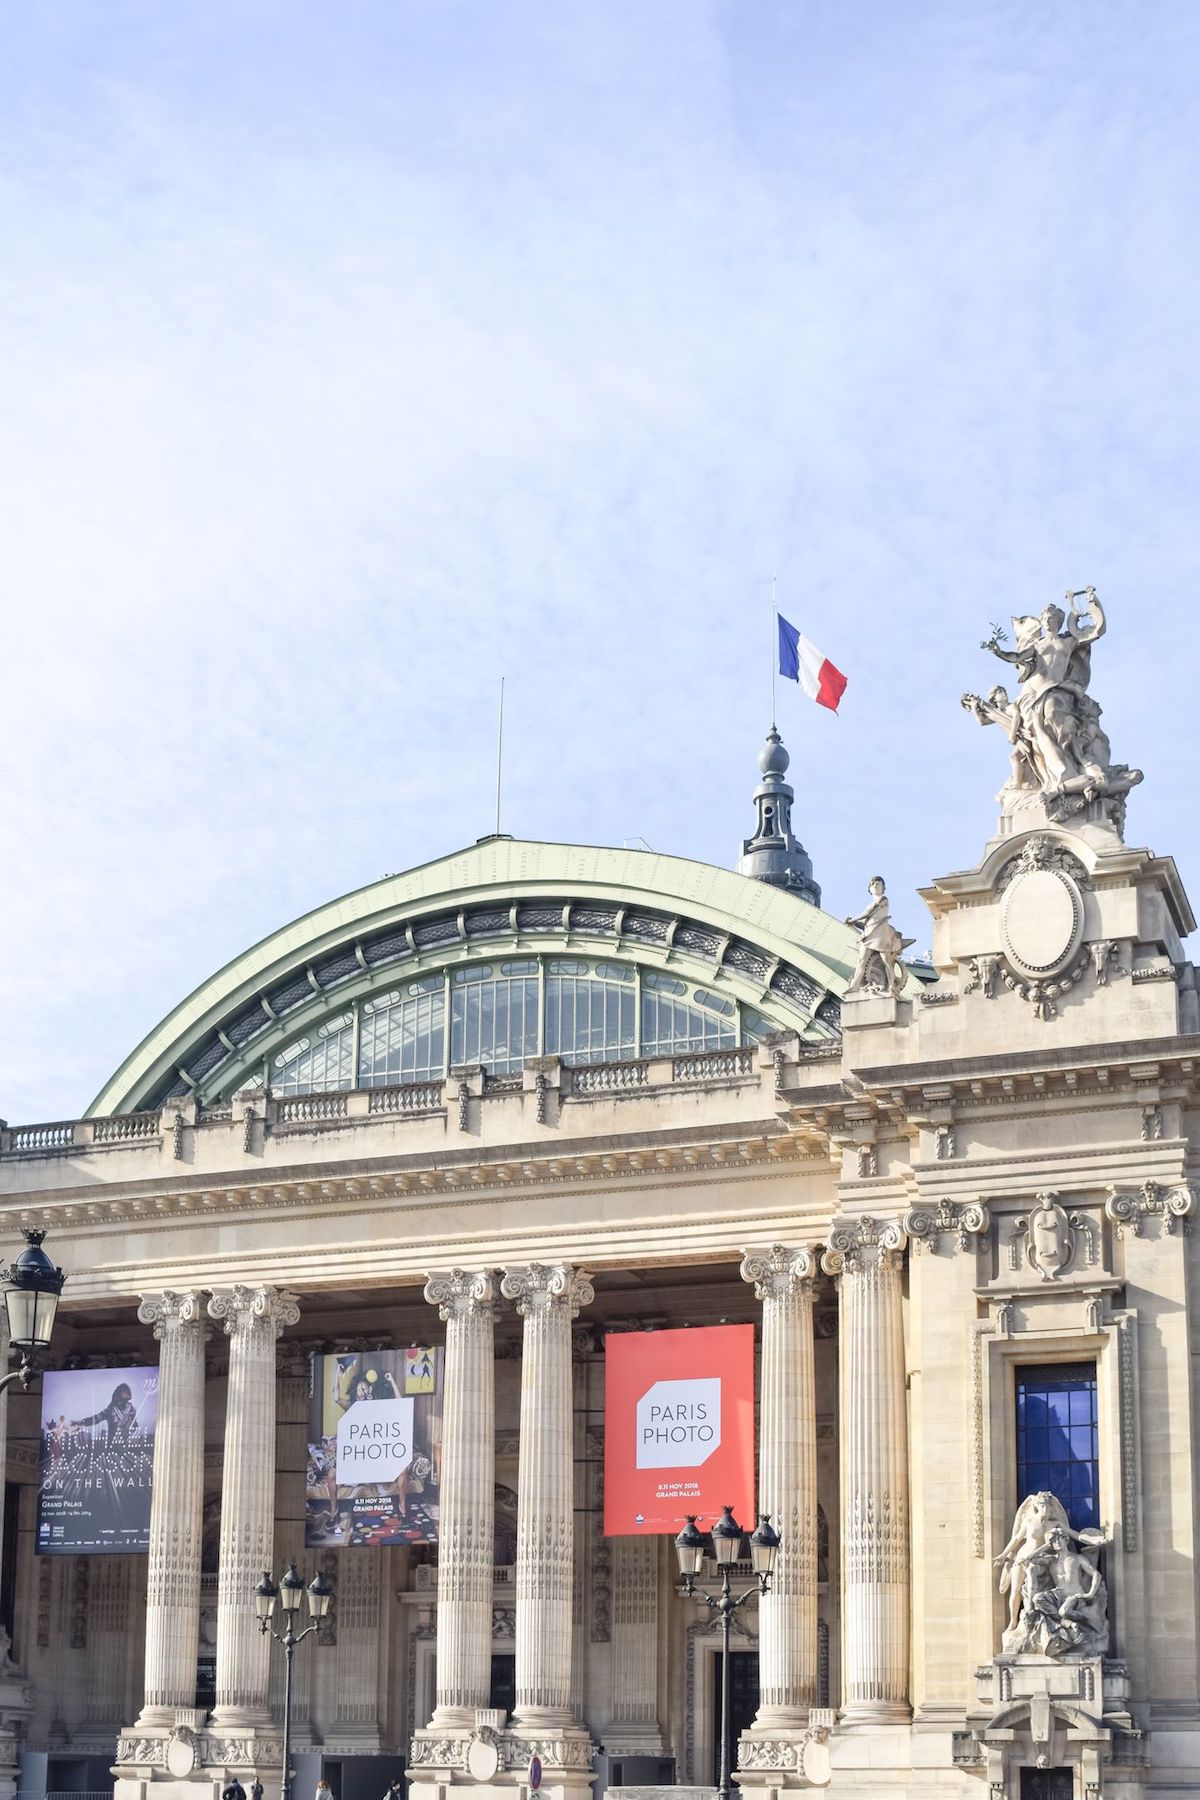 Grand Palais: a hall built for the Universal Exhibition of 1900